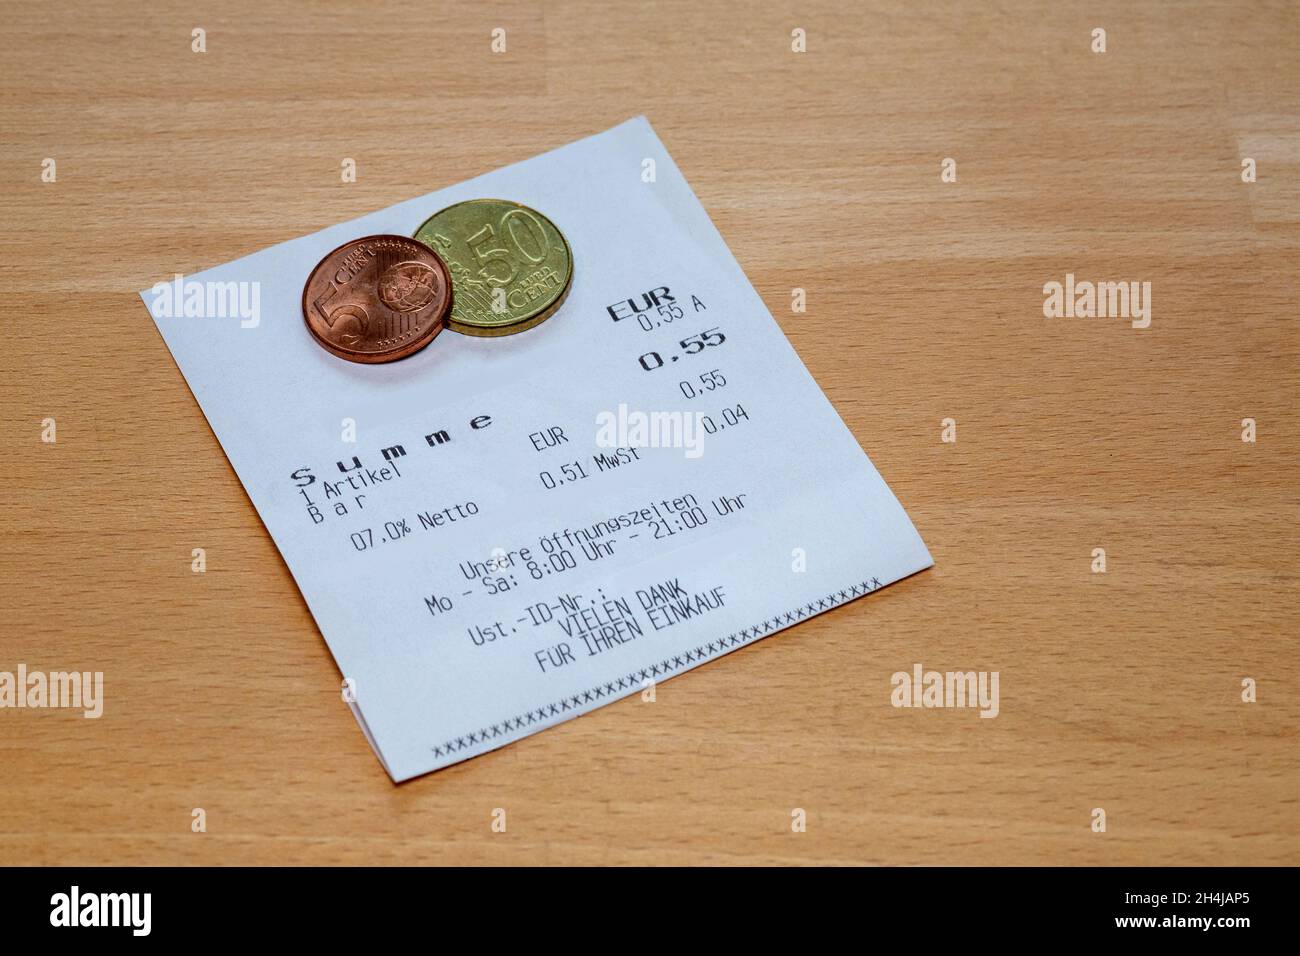 Printout of a receipt on wooden table with small euro coins The receipt contains the German words for: Sum, items, cash, net, VAT, VAT ID no., our ope Stock Photo